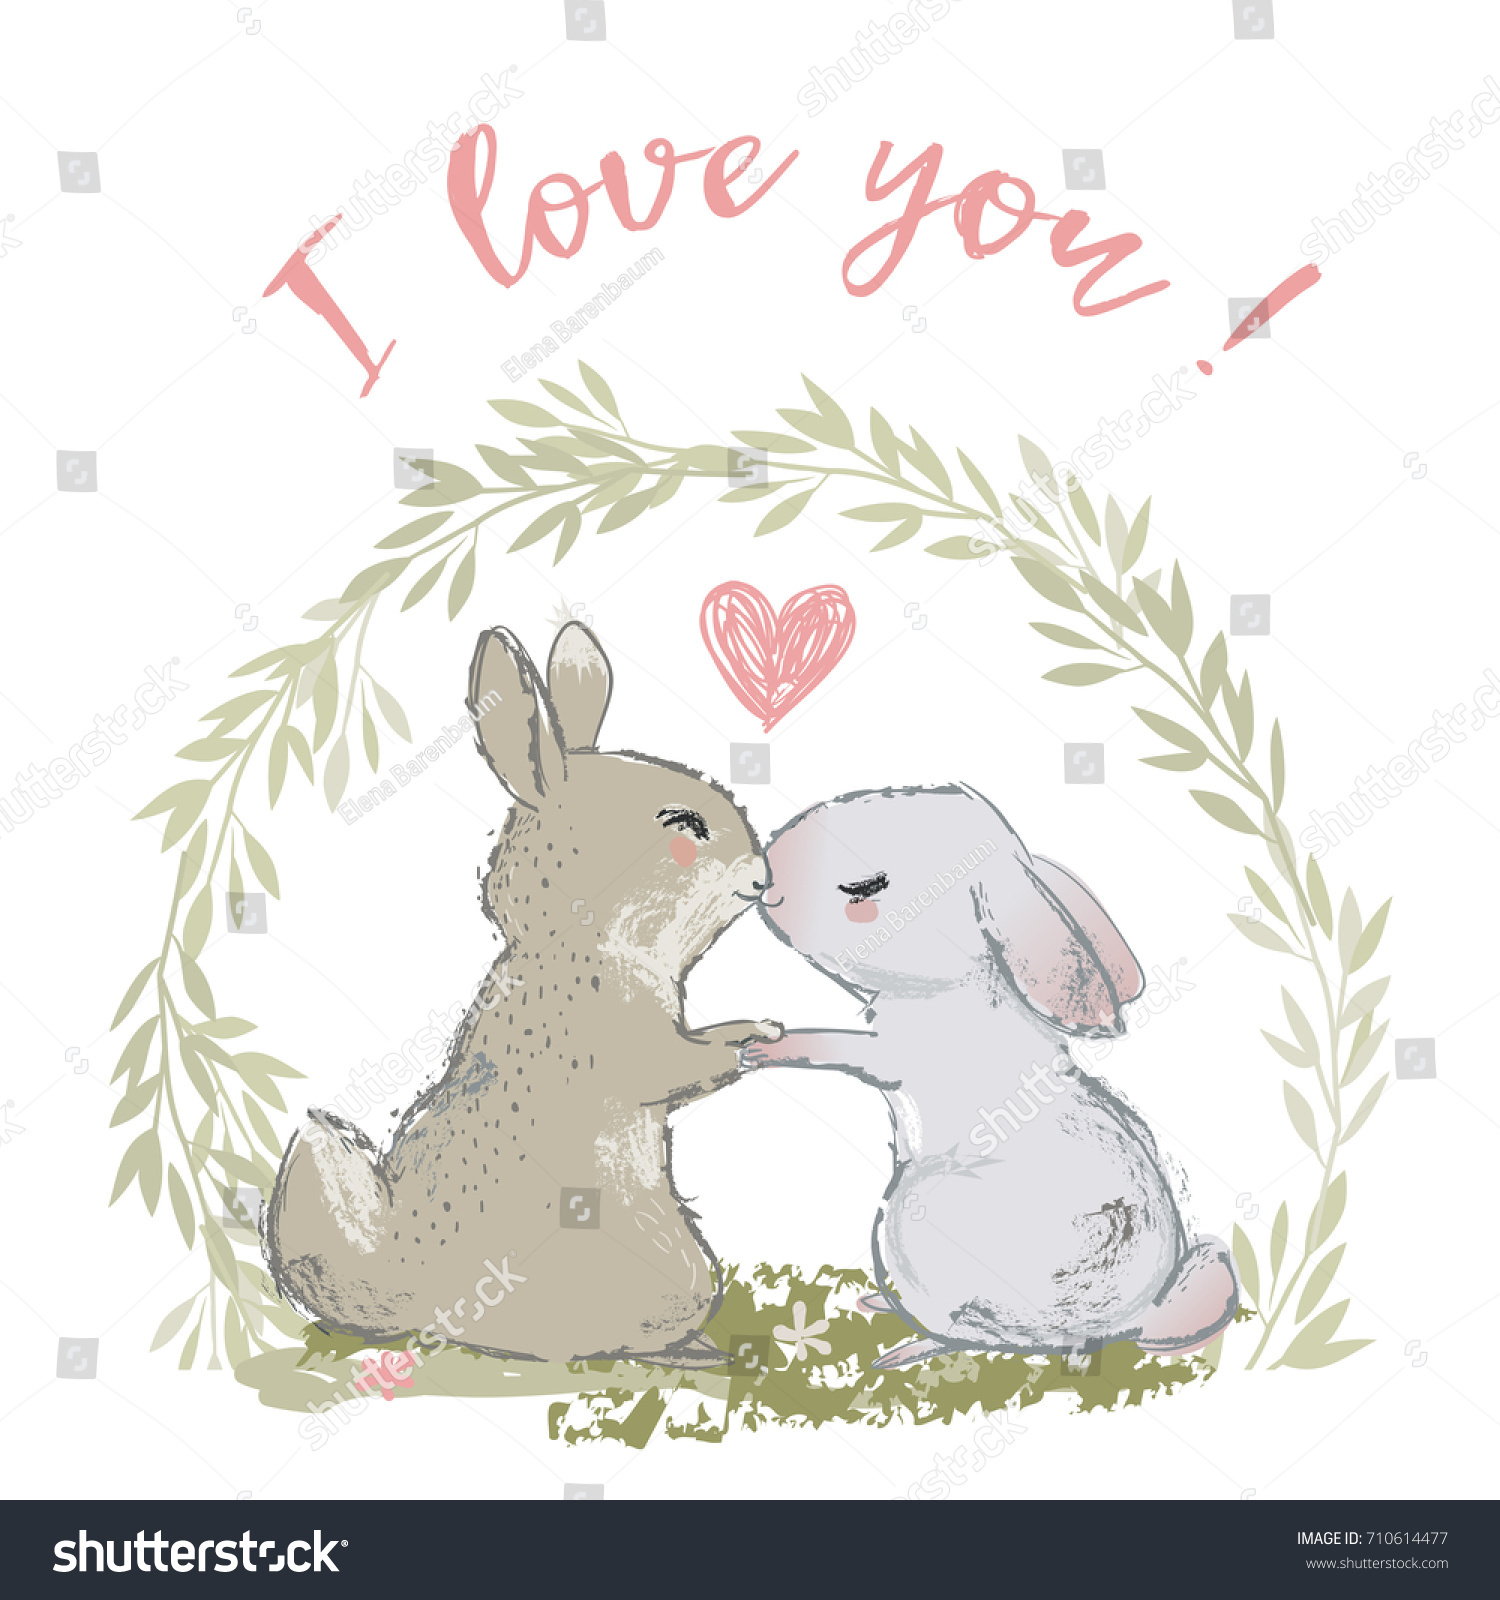 Download Cute Hares Couple Kissing Vector Illustration Stock Vector Royalty Free 710614477